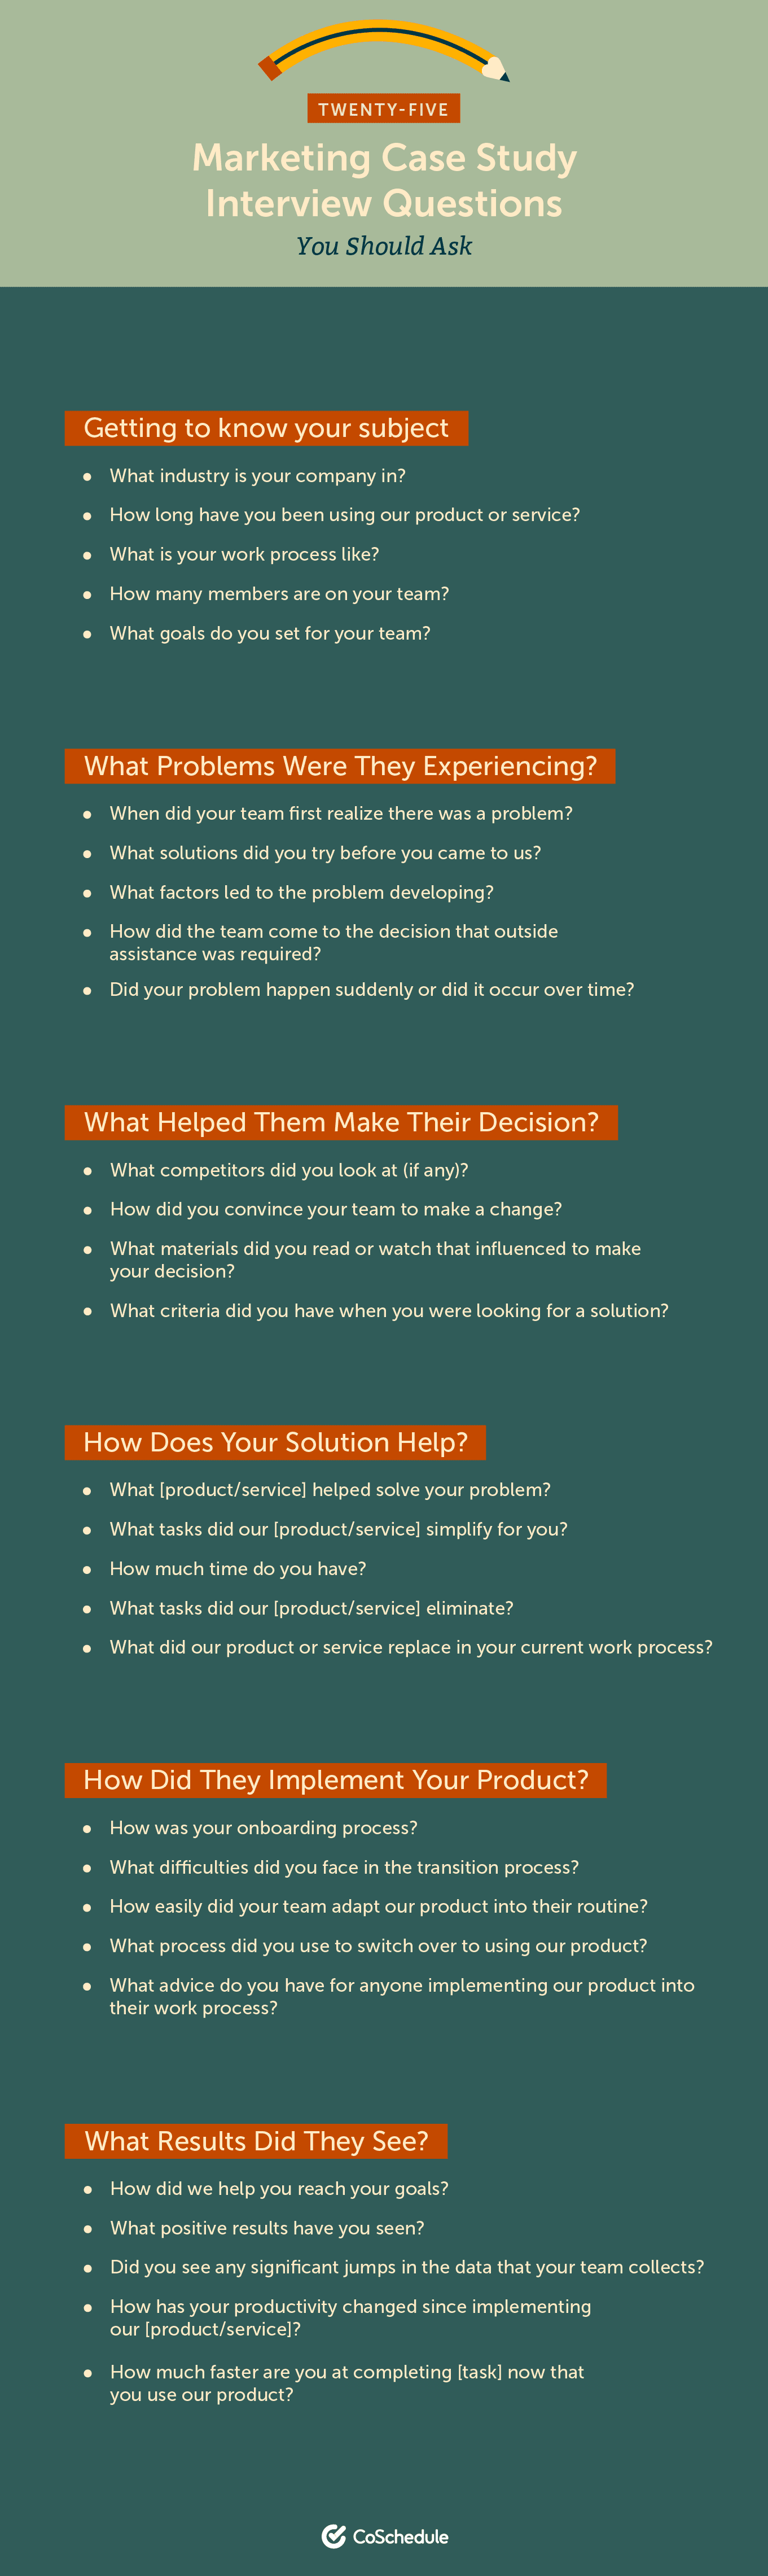 List of 25 marketing questions you should ask when making a case study.